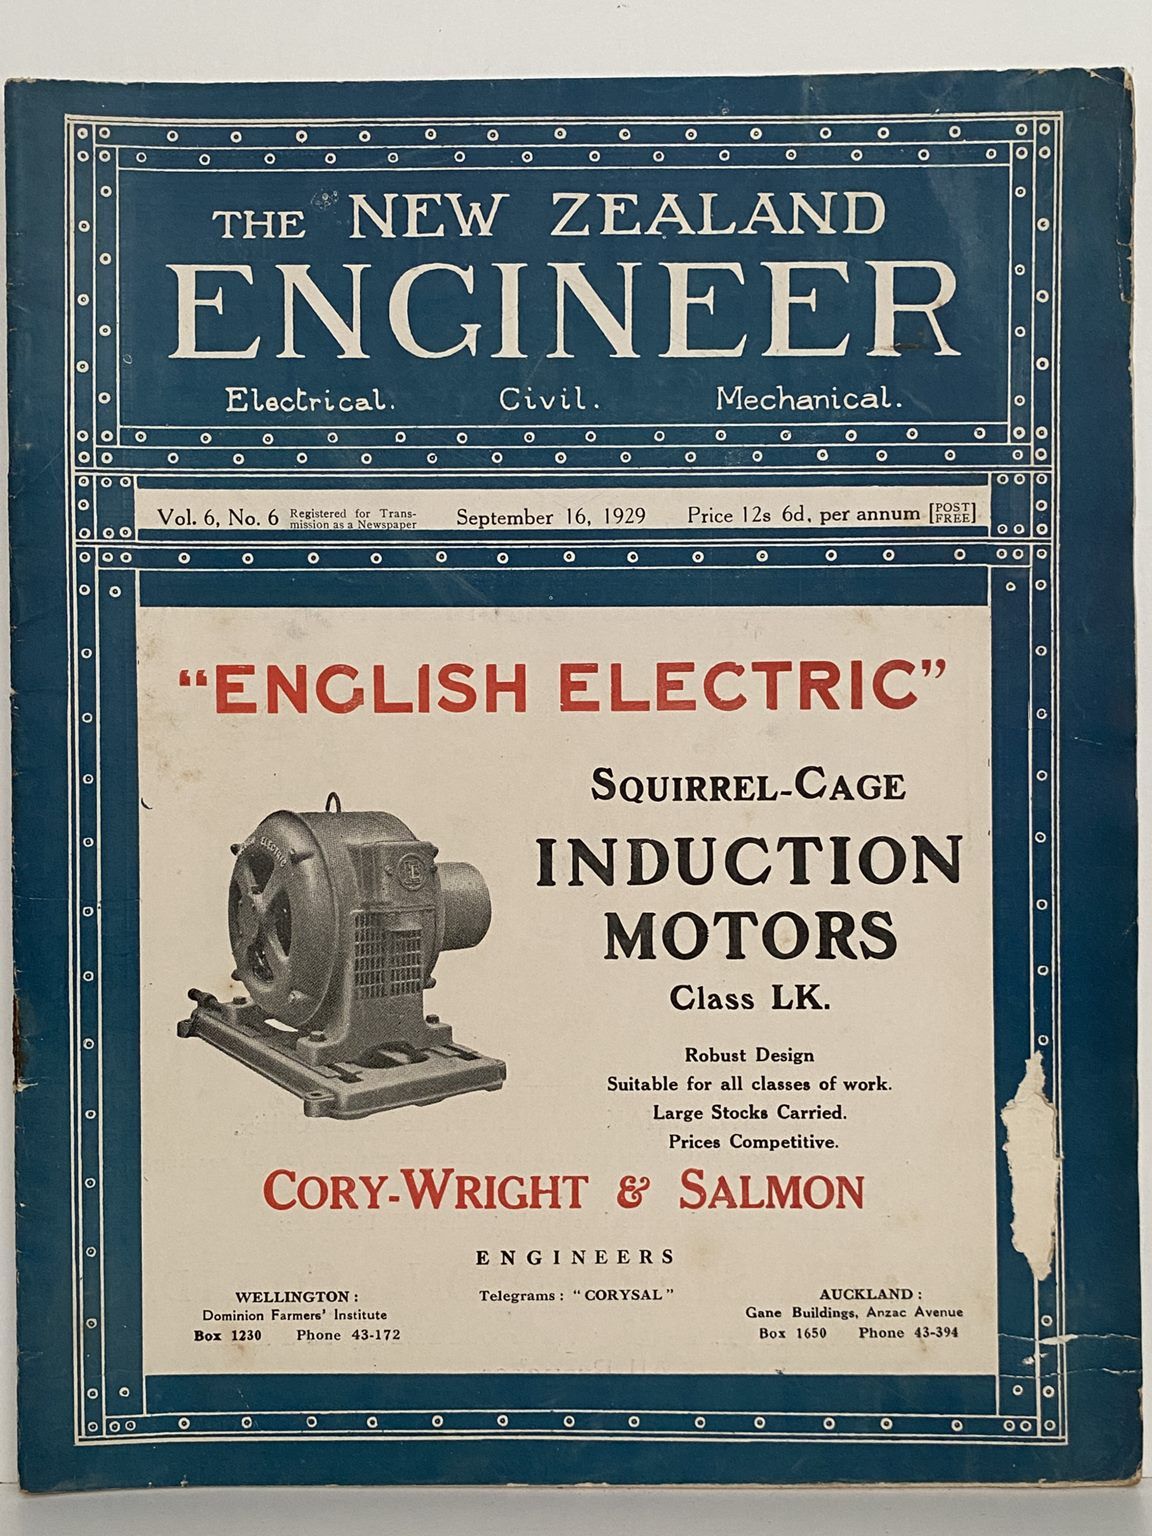 OLD MAGAZINE: The New Zealand Engineer Vol. 6, No. 6 - 16 September 1929